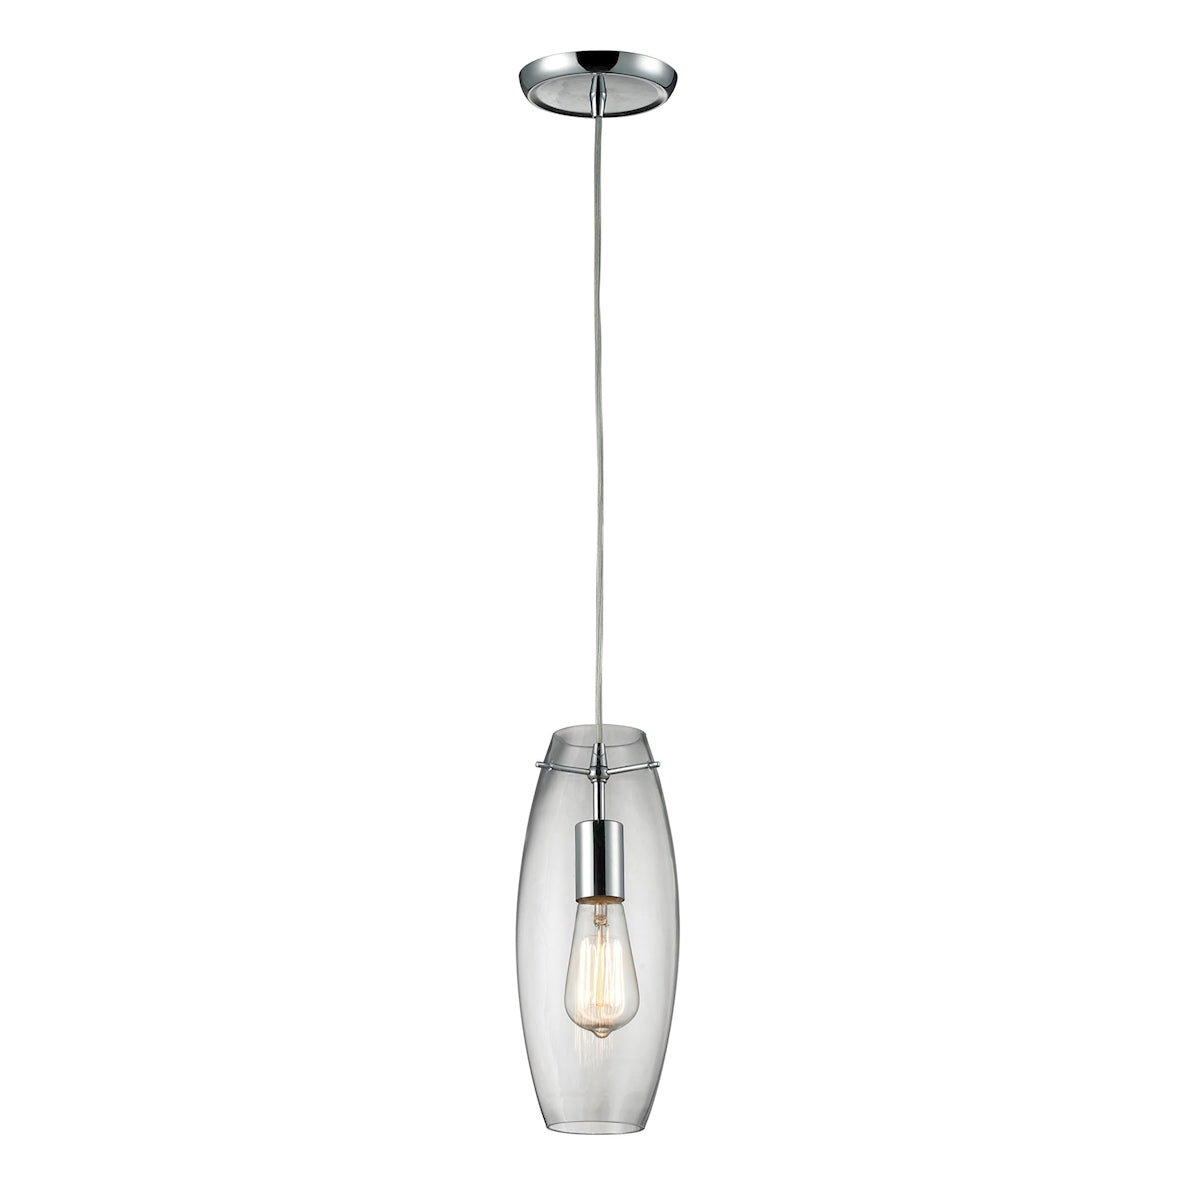 ELK Lighting 60054-1 Menlow Park 1-Light Mini Pendant in Polished Chrome with Smoked Glass